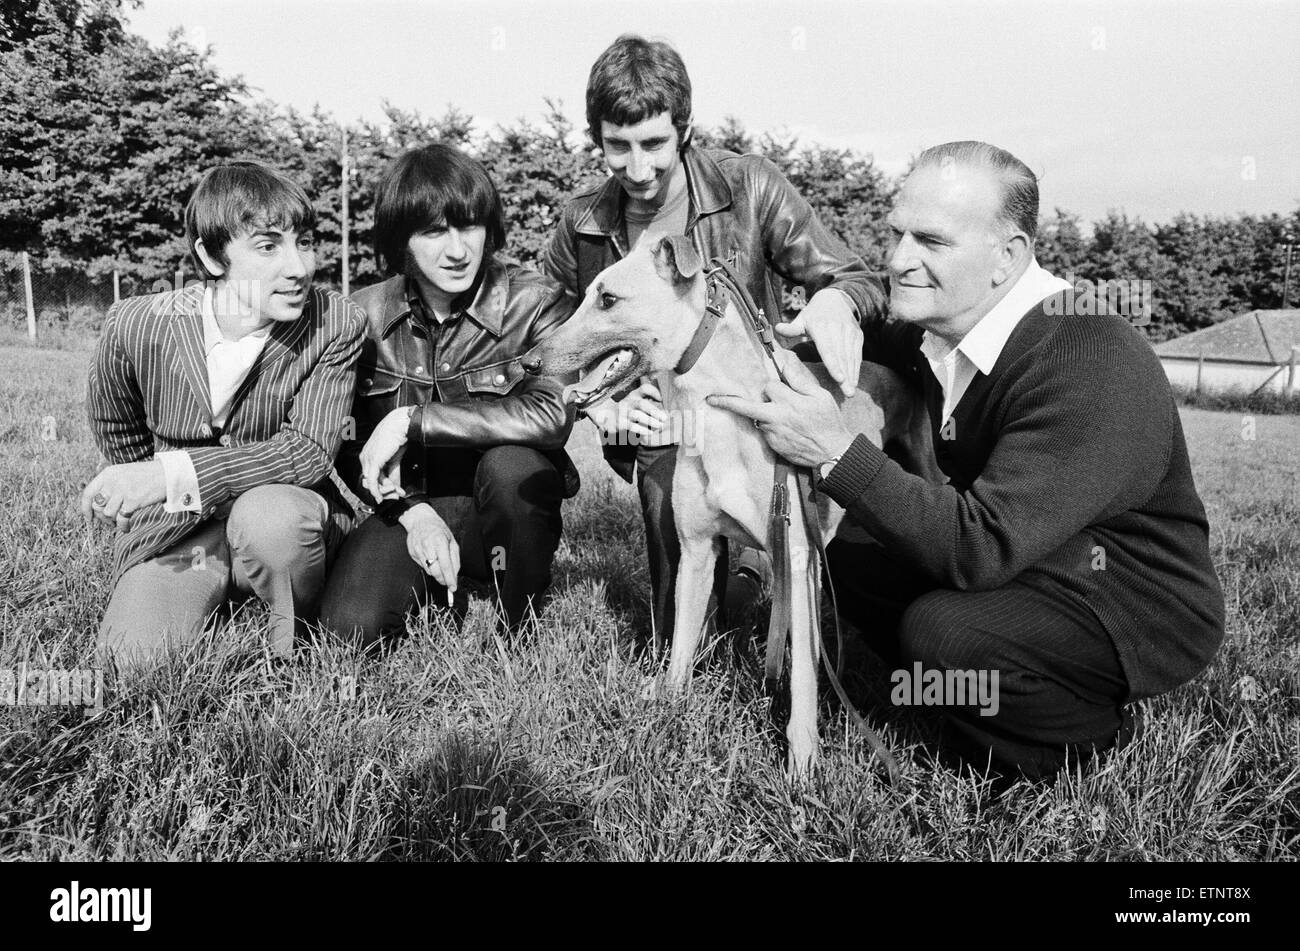 The world's fastest greyhound and favourite for the greyhound derby Yellow Printer comes out of his guarded hiding place to meet rock group The Who. The Who members left to right: Keith Moon, John Entwistle and Pete Townshend with  trainer John Bassett.  20th May 1968. Stock Photo